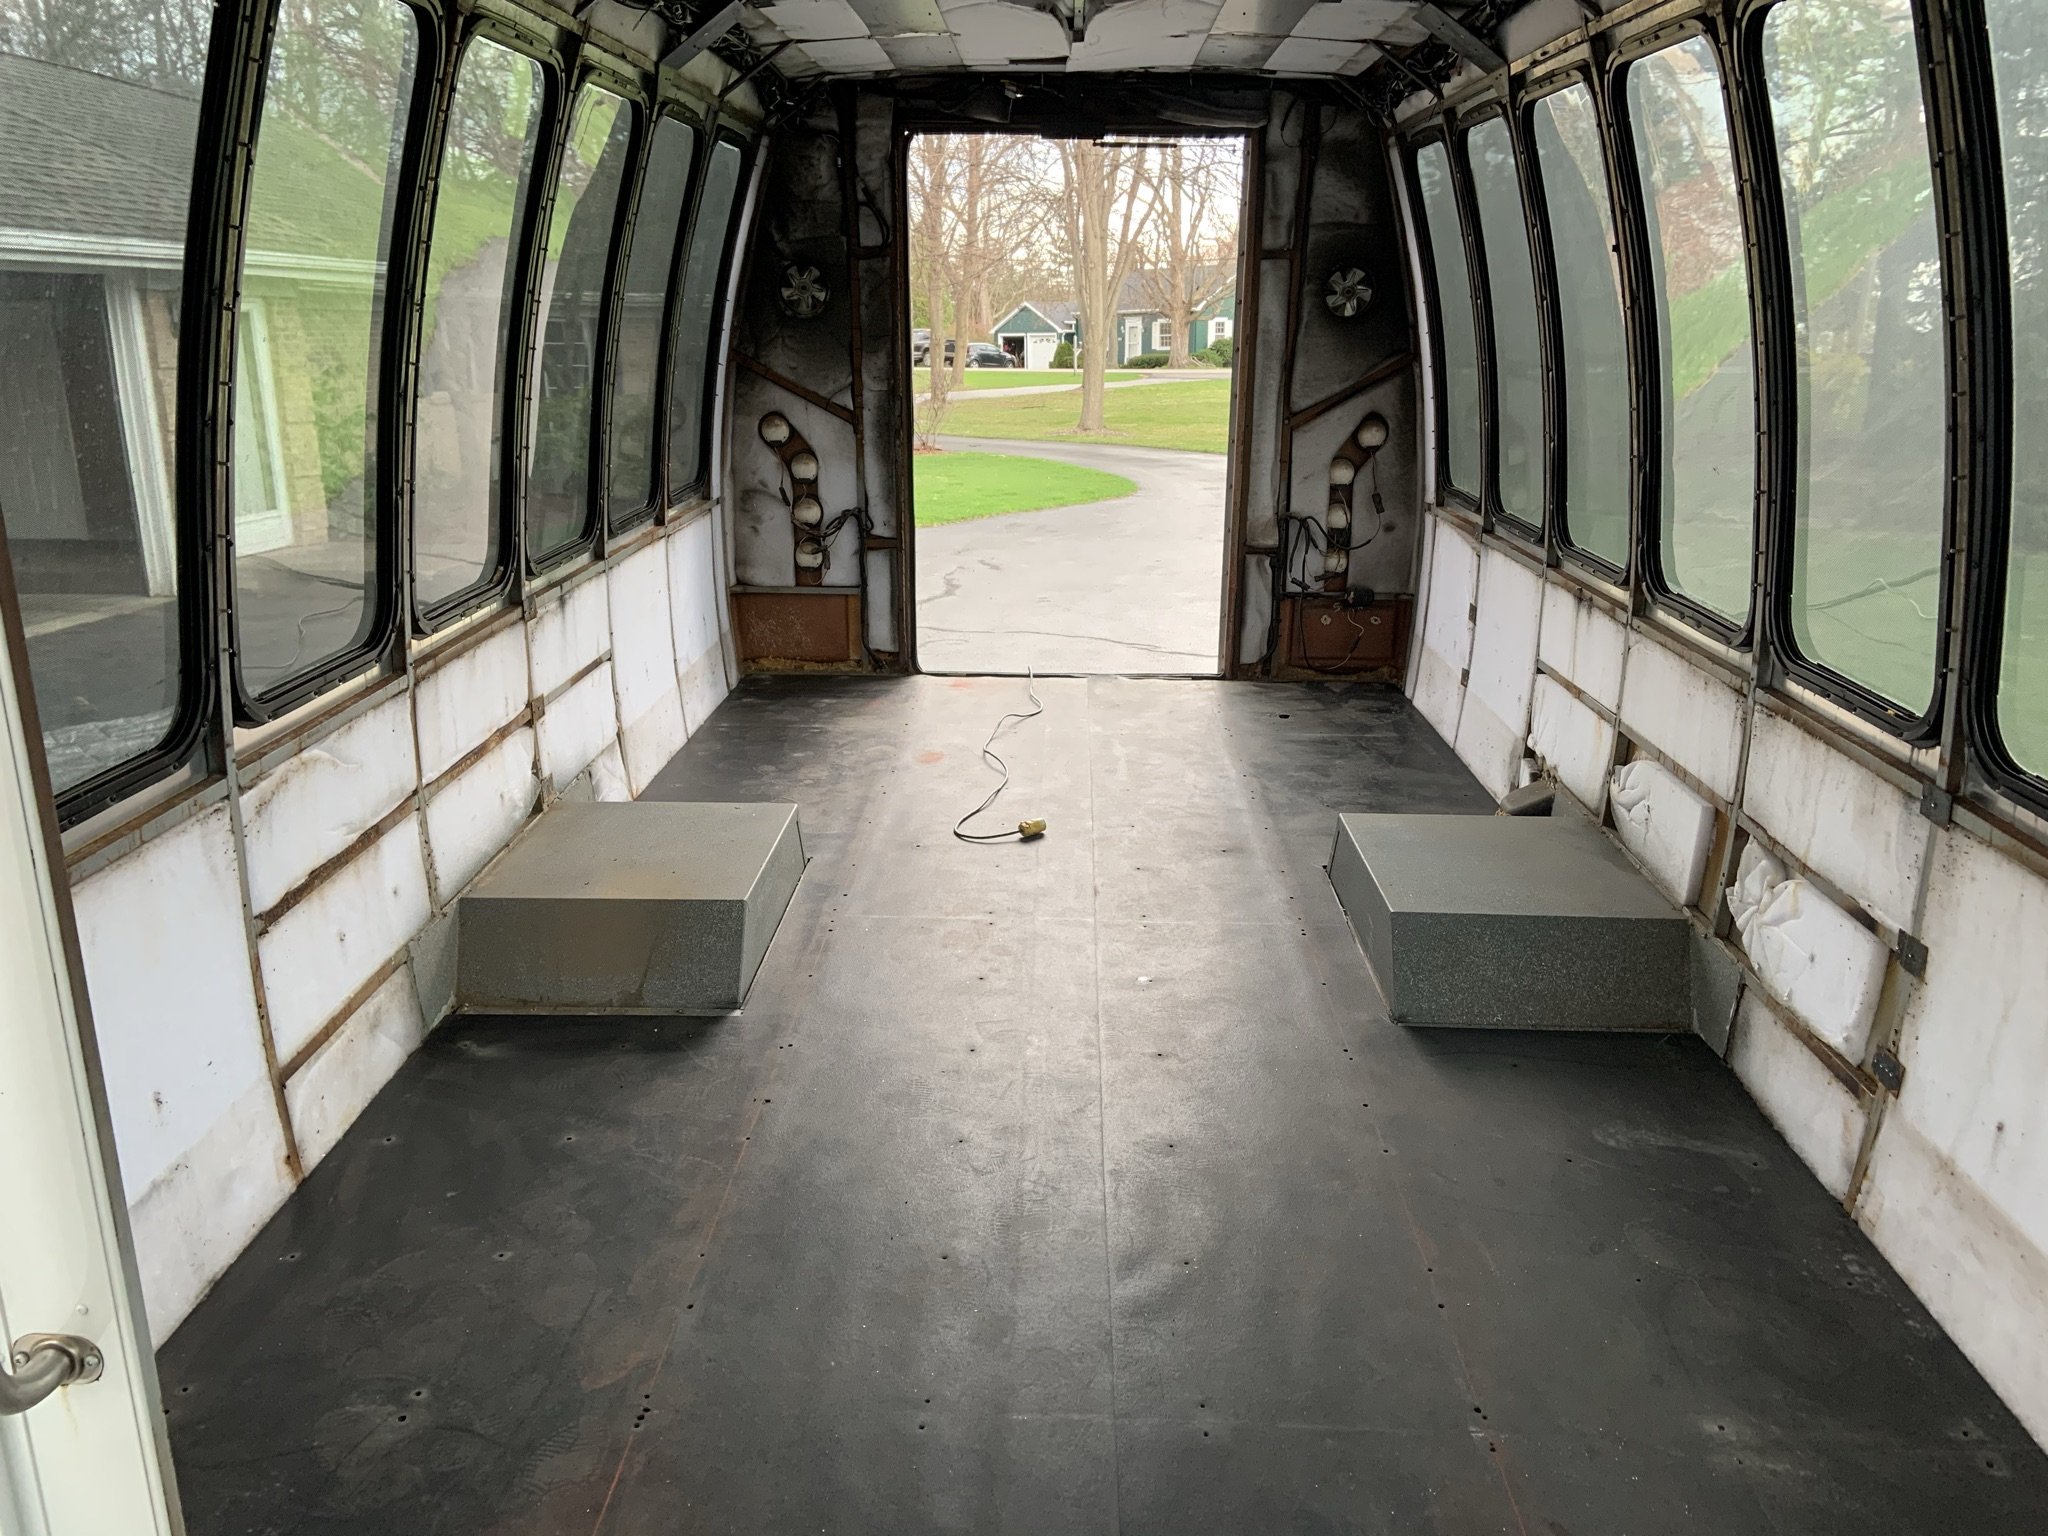 Need advice on shuttle bus conversion I plan to make an offer on